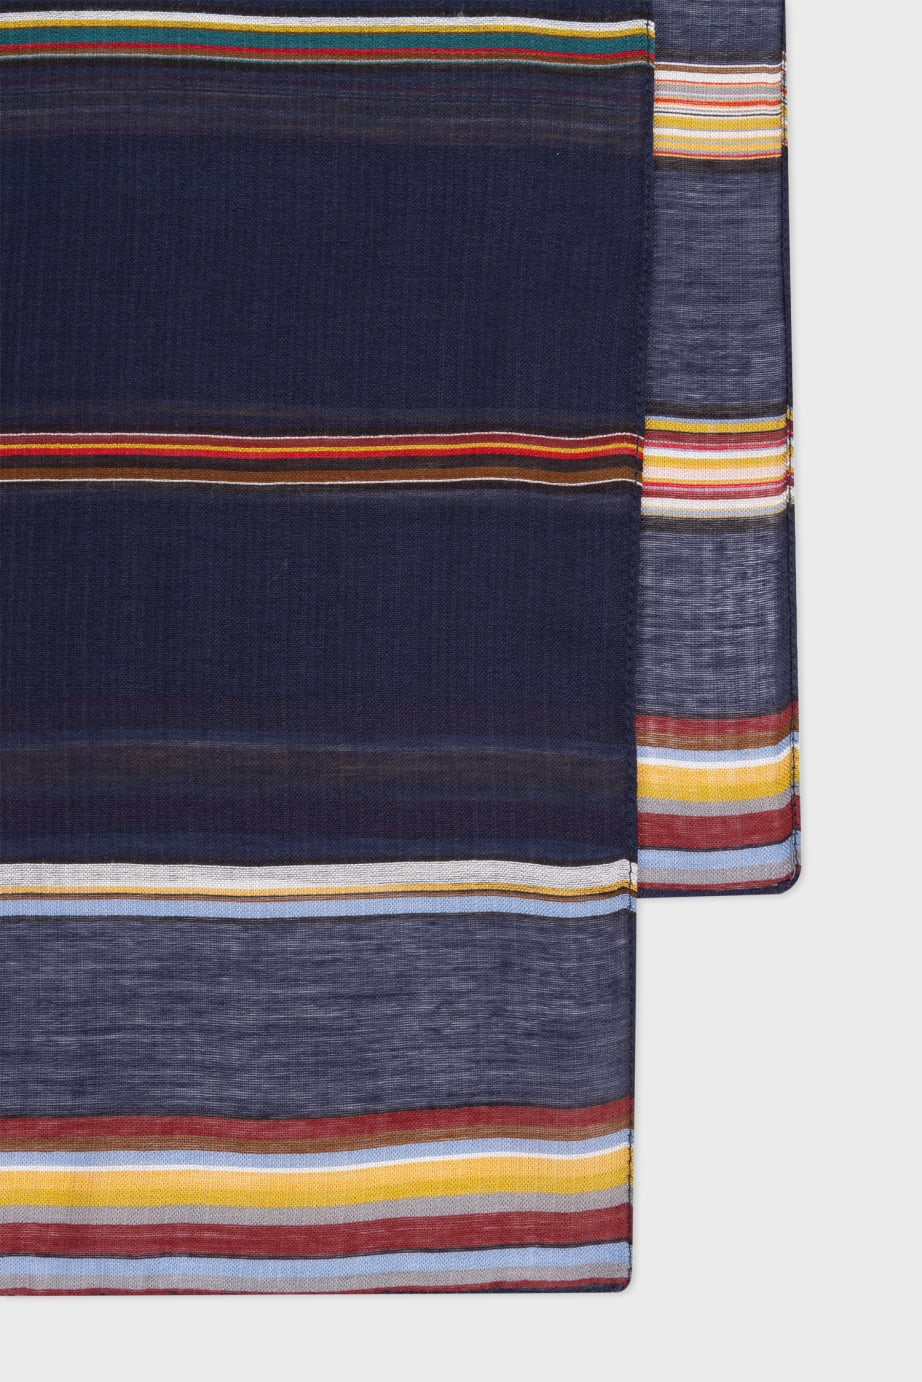 Product View - Women's Navy Broken 'Signature Stripe' Silk-Blend Scarf by Paul Smith